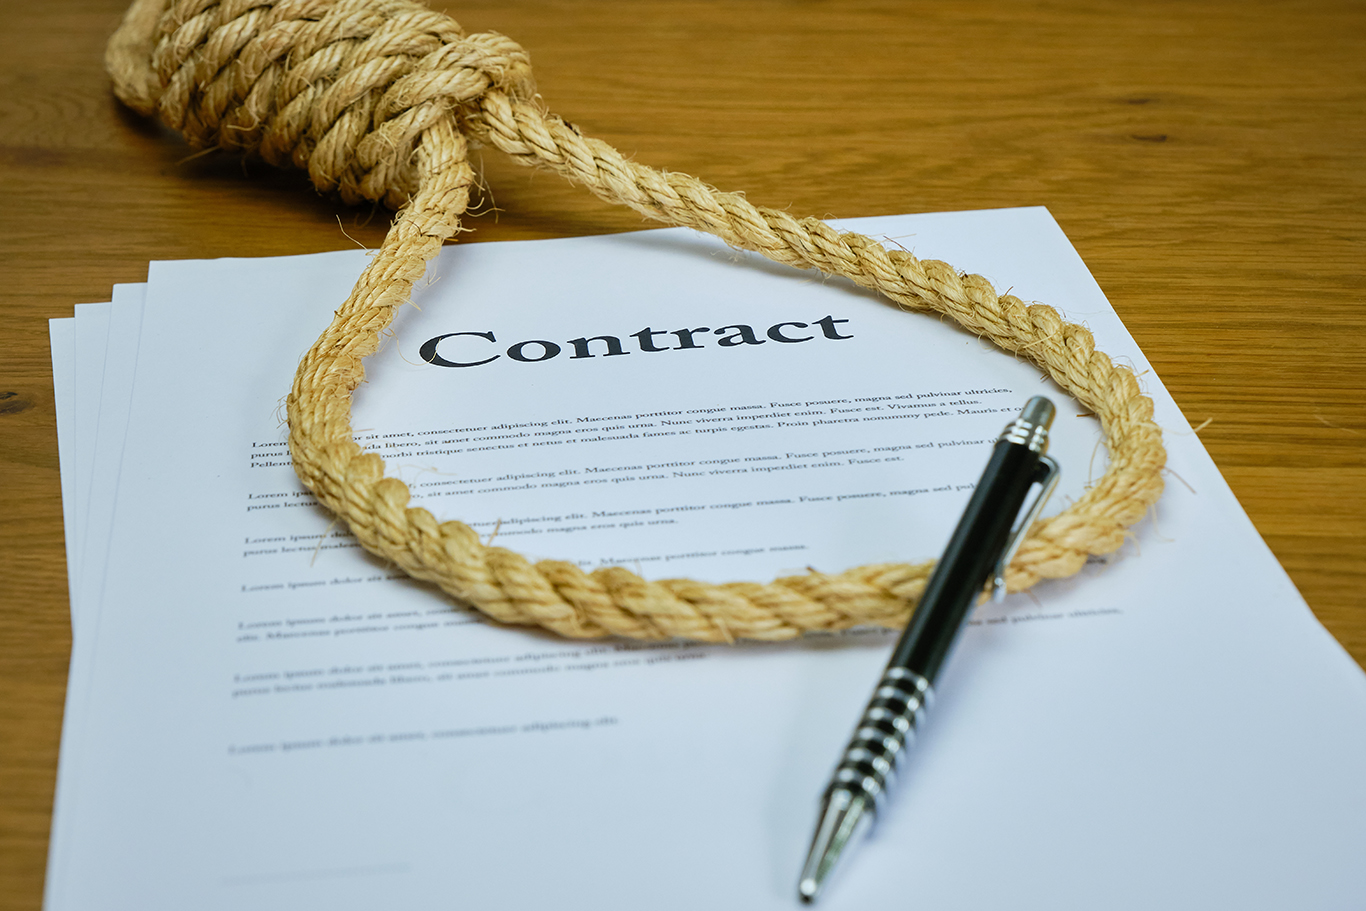 Substantive unconscionability in the context of an arbitration agreement